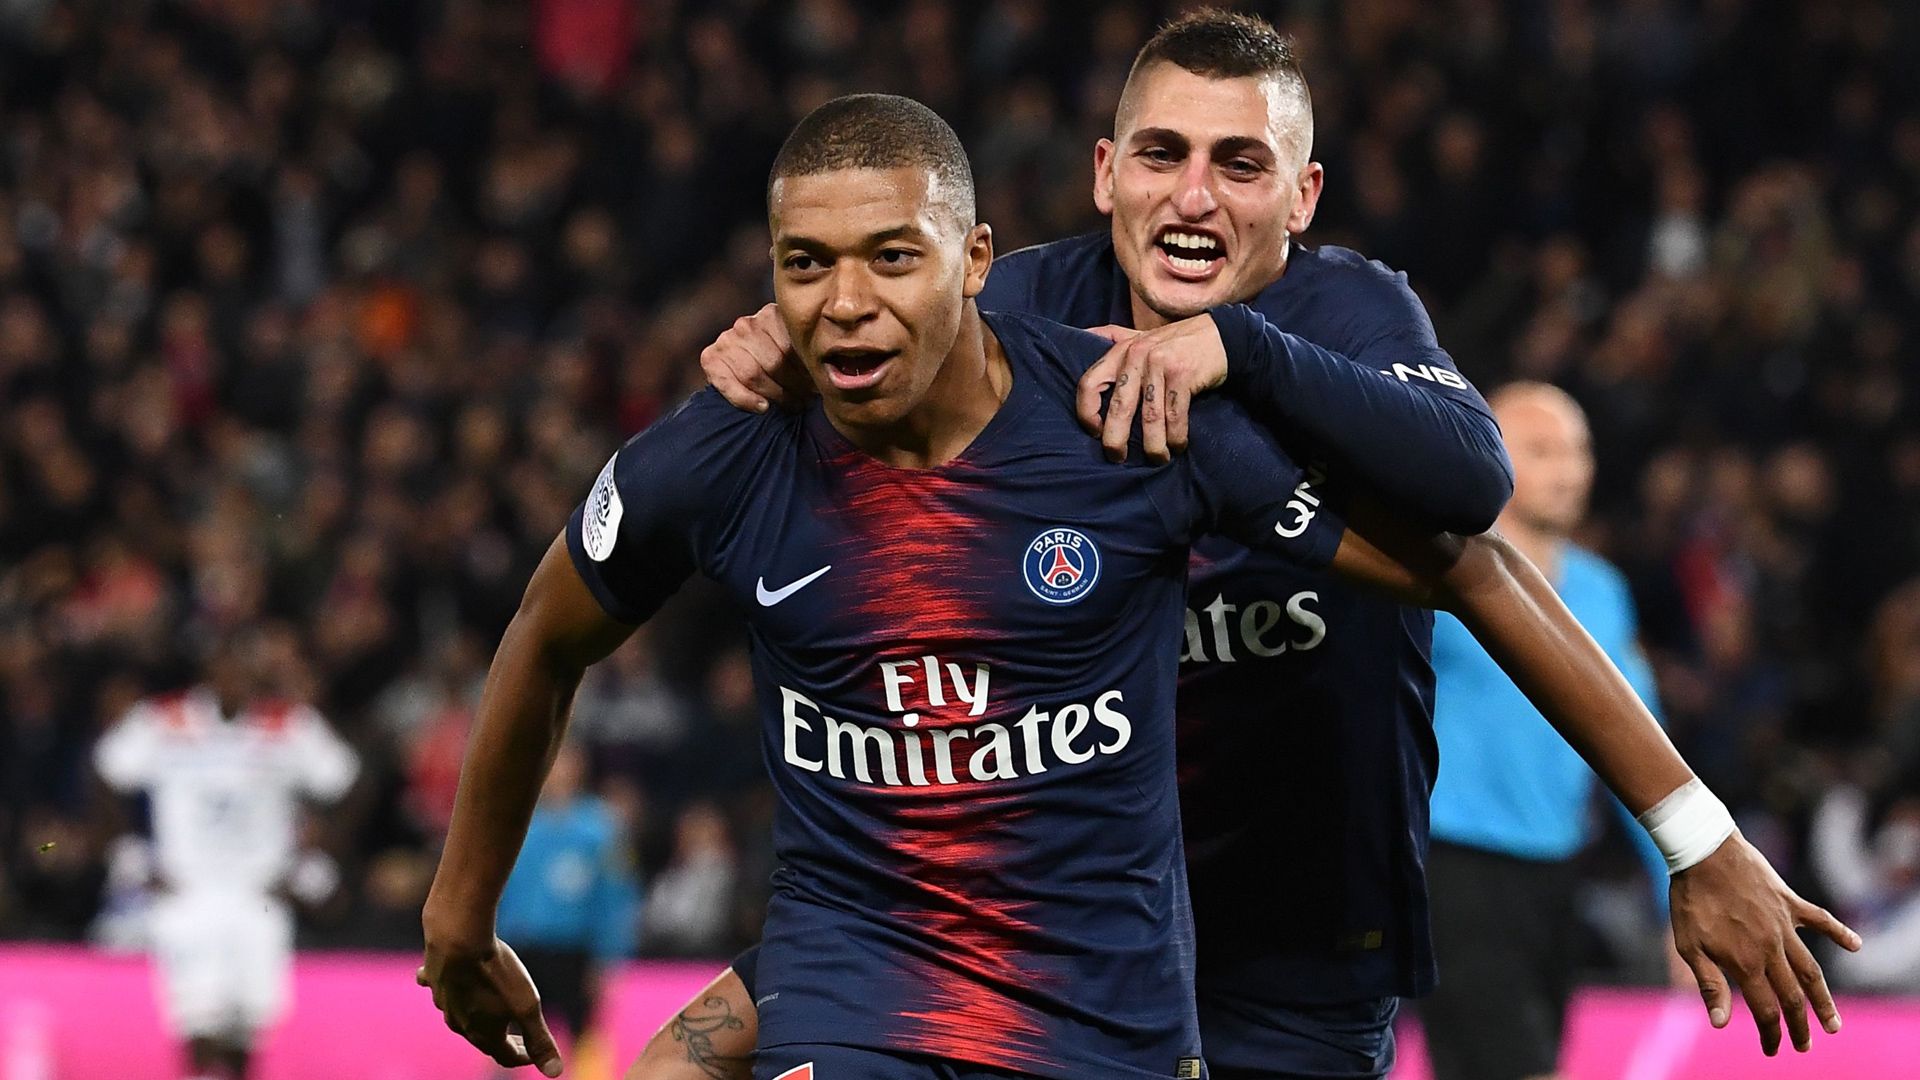 'I'm going to miss you a lot' - PSG superstar Kylian Mbappe bids 